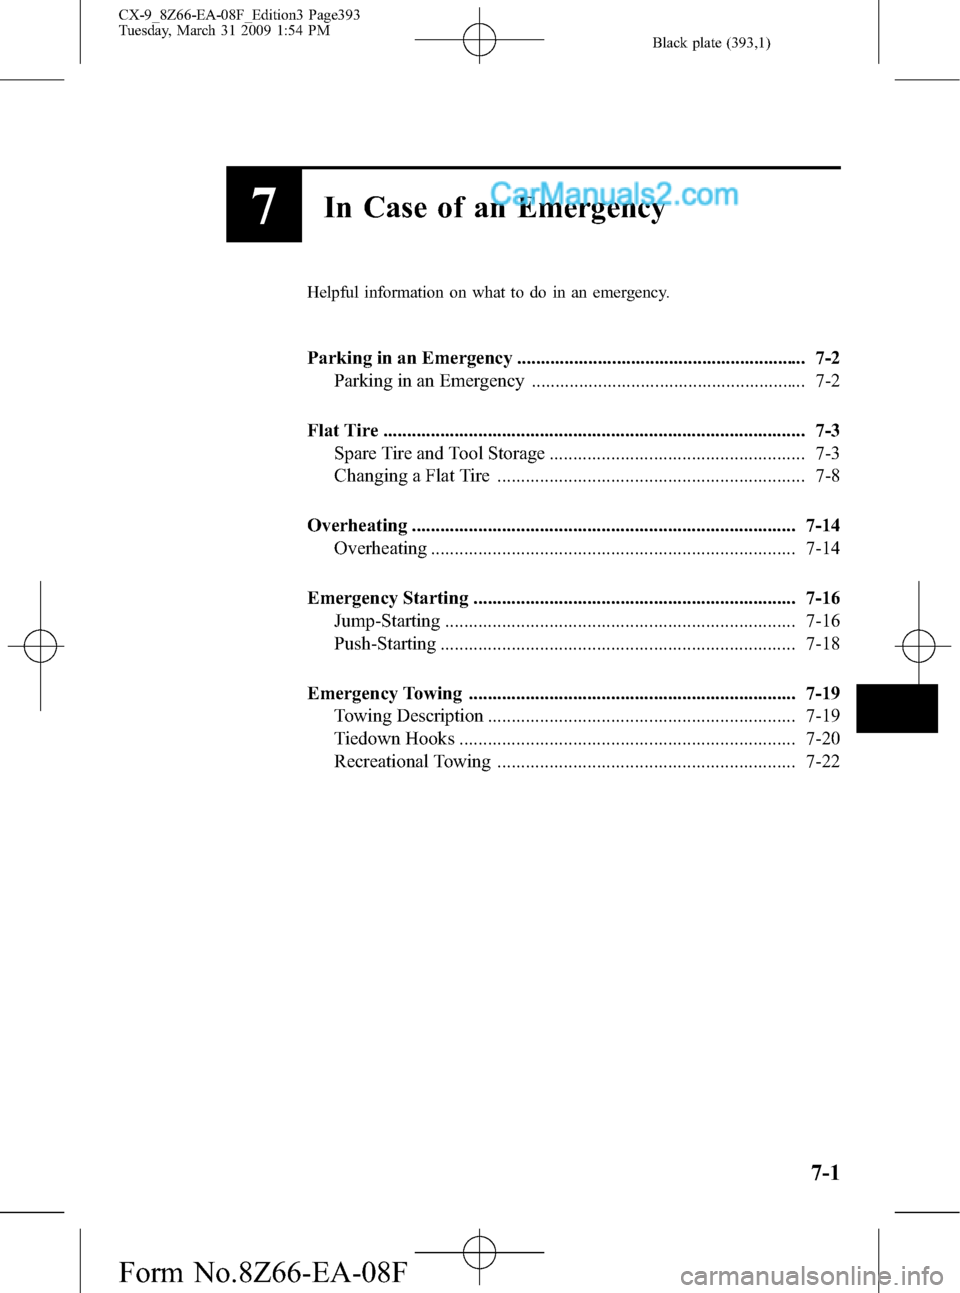 MAZDA MODEL CX-9 2009  Owners Manual (in English) Black plate (393,1)
7In Case of an Emergency
Helpful information on what to do in an emergency.
Parking in an Emergency ............................................................. 7-2
Parking in an 